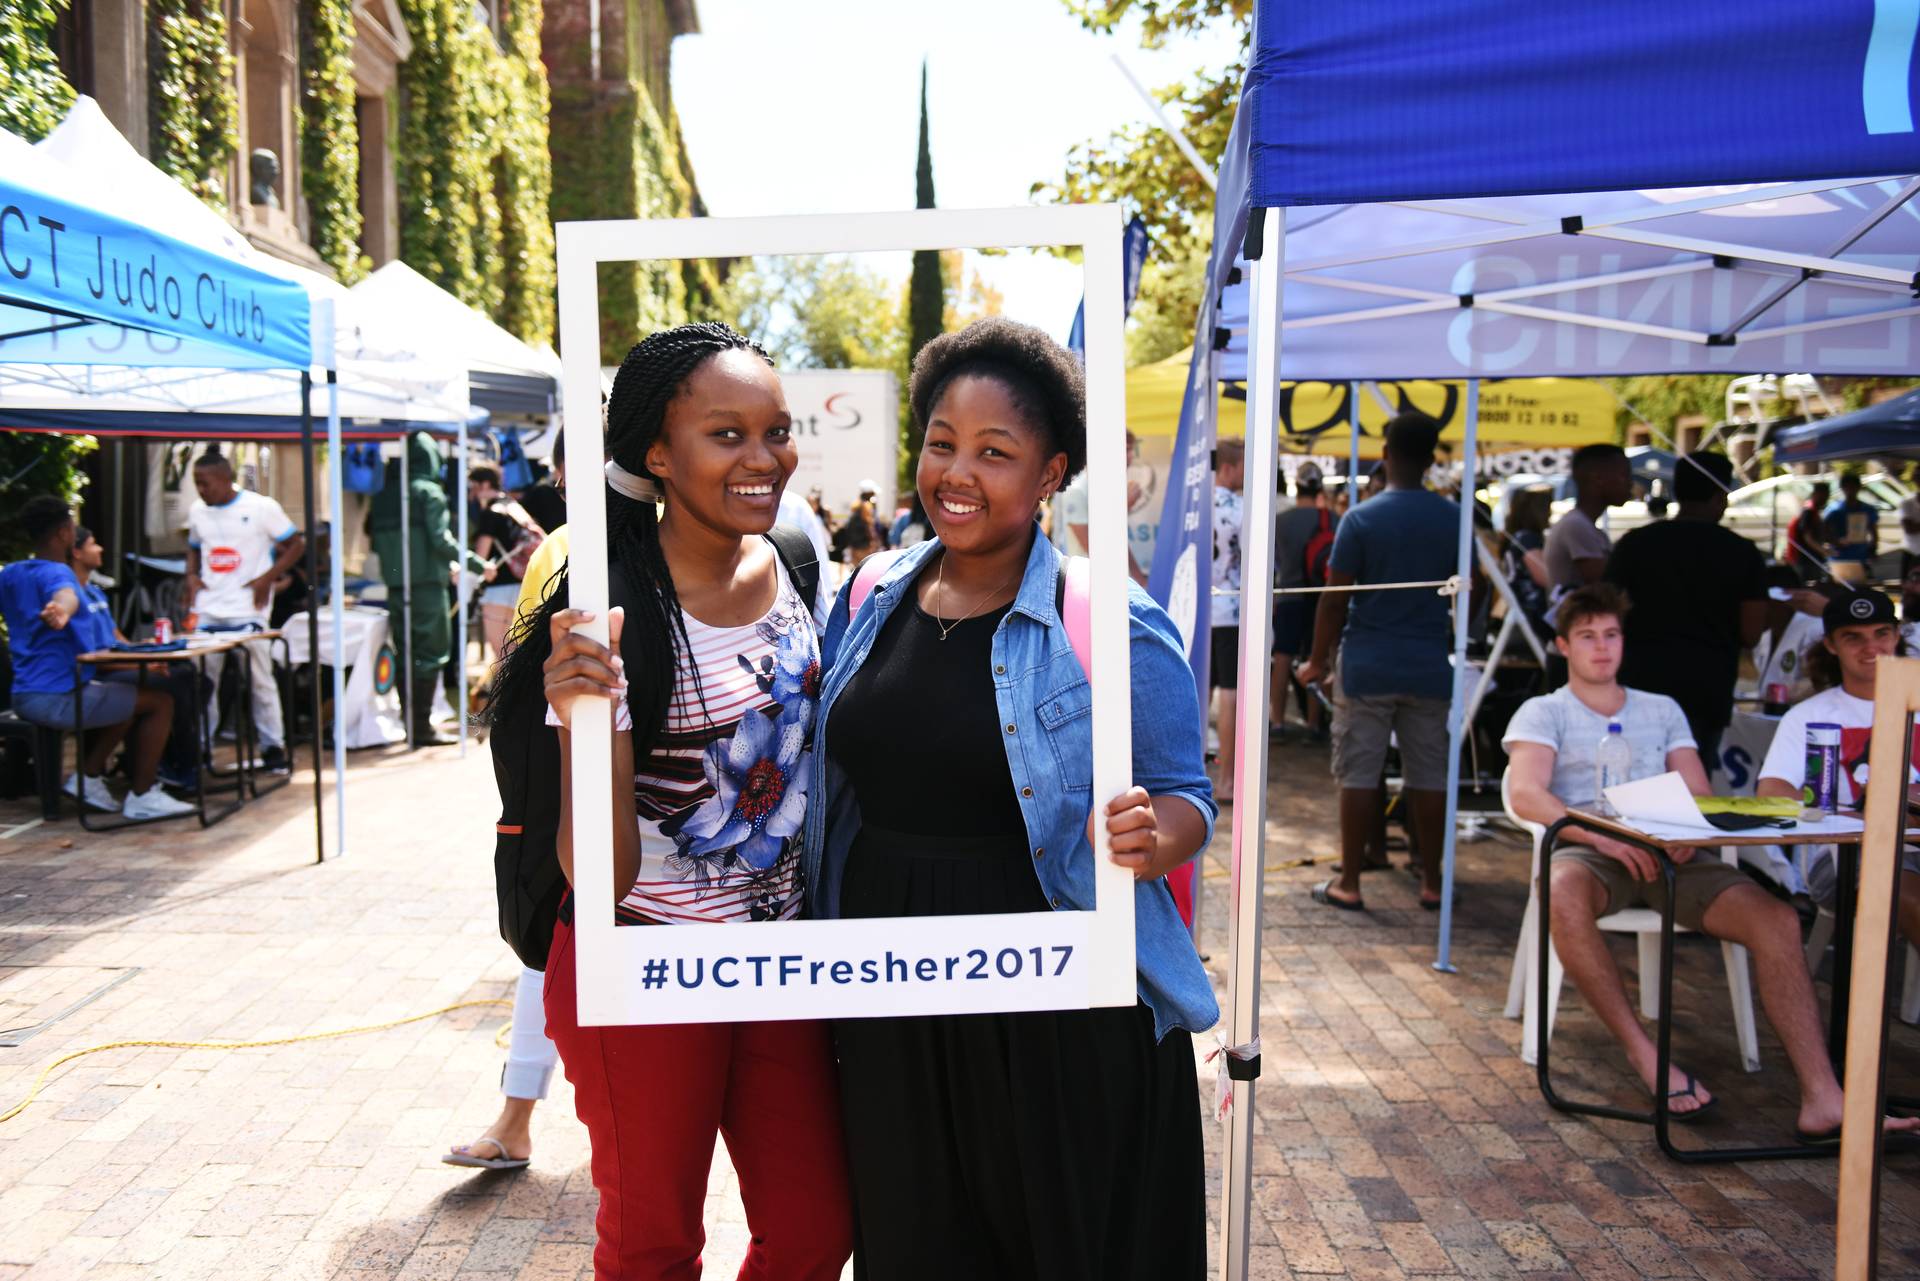 Freshers having fun during plaza week, where UCT sports clubs and student societies flaunt their wares.